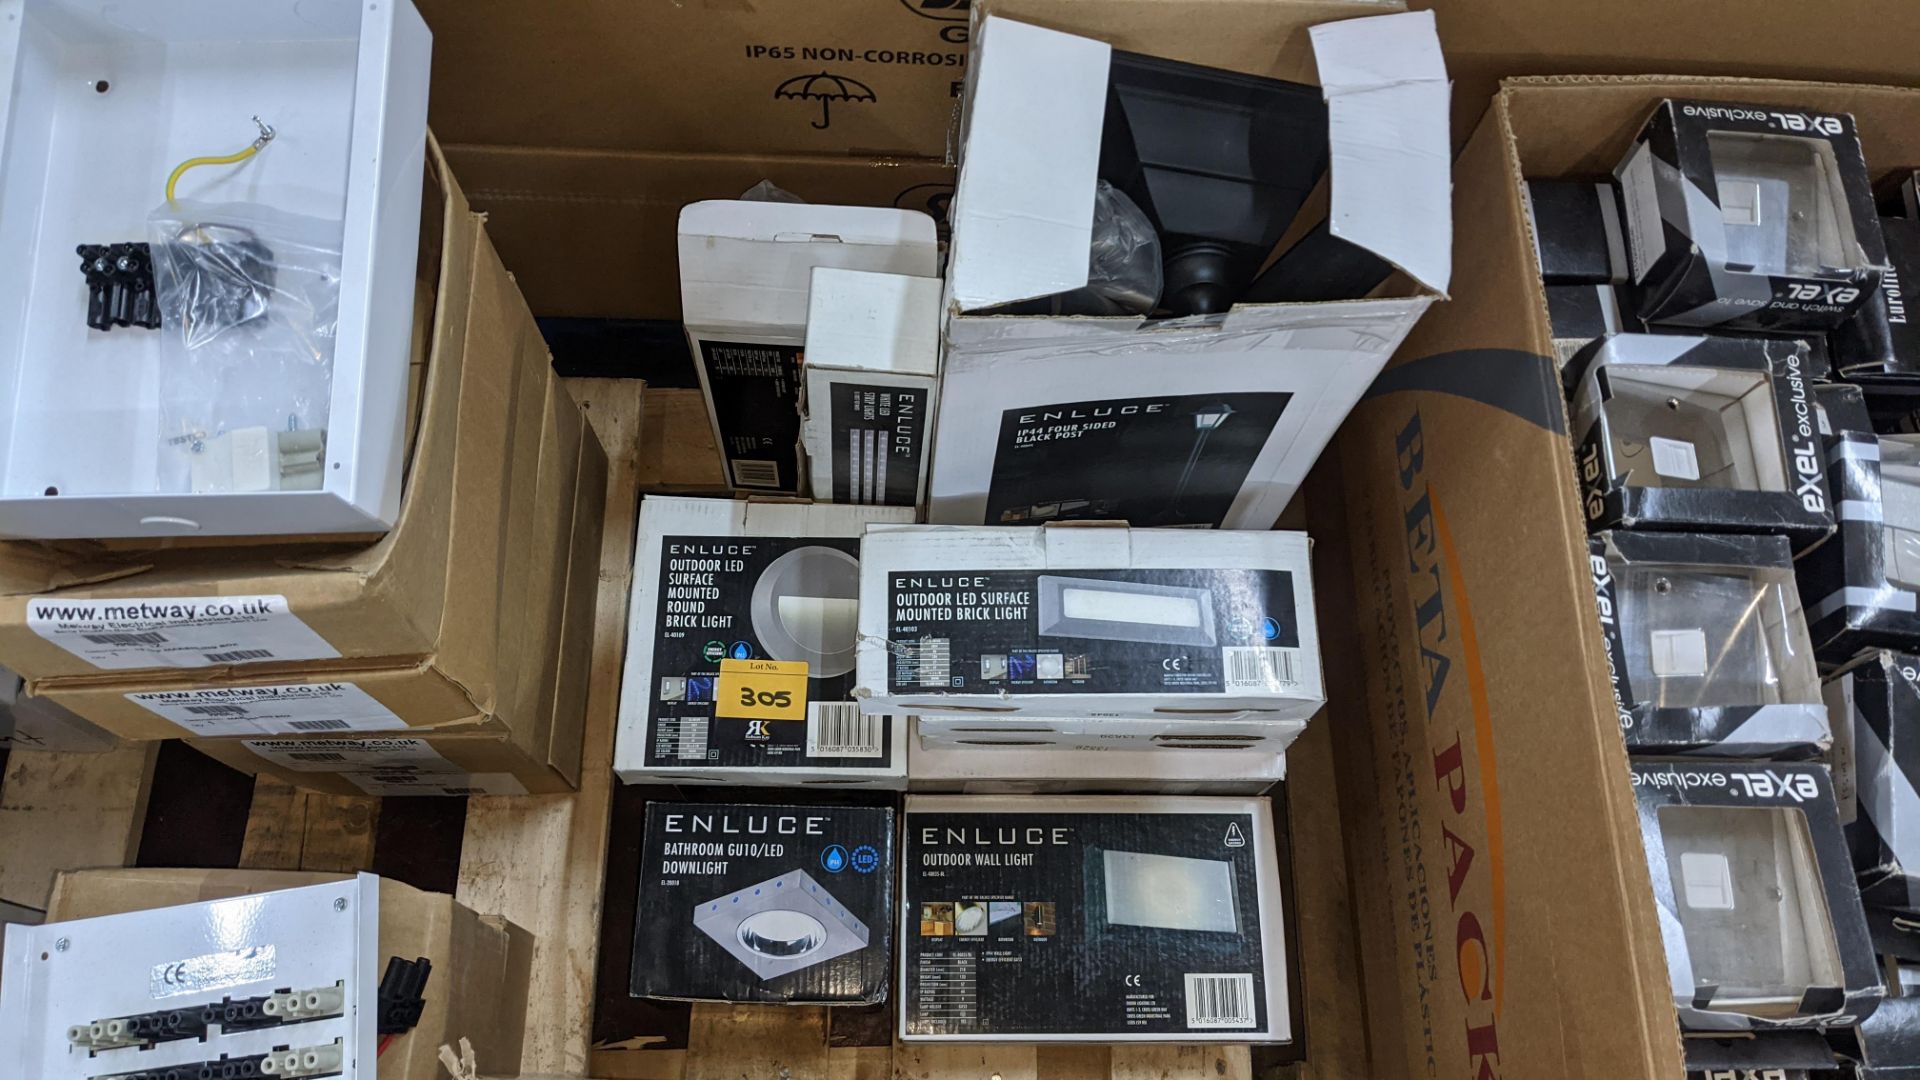 Quantity of Enluce assorted lighting products